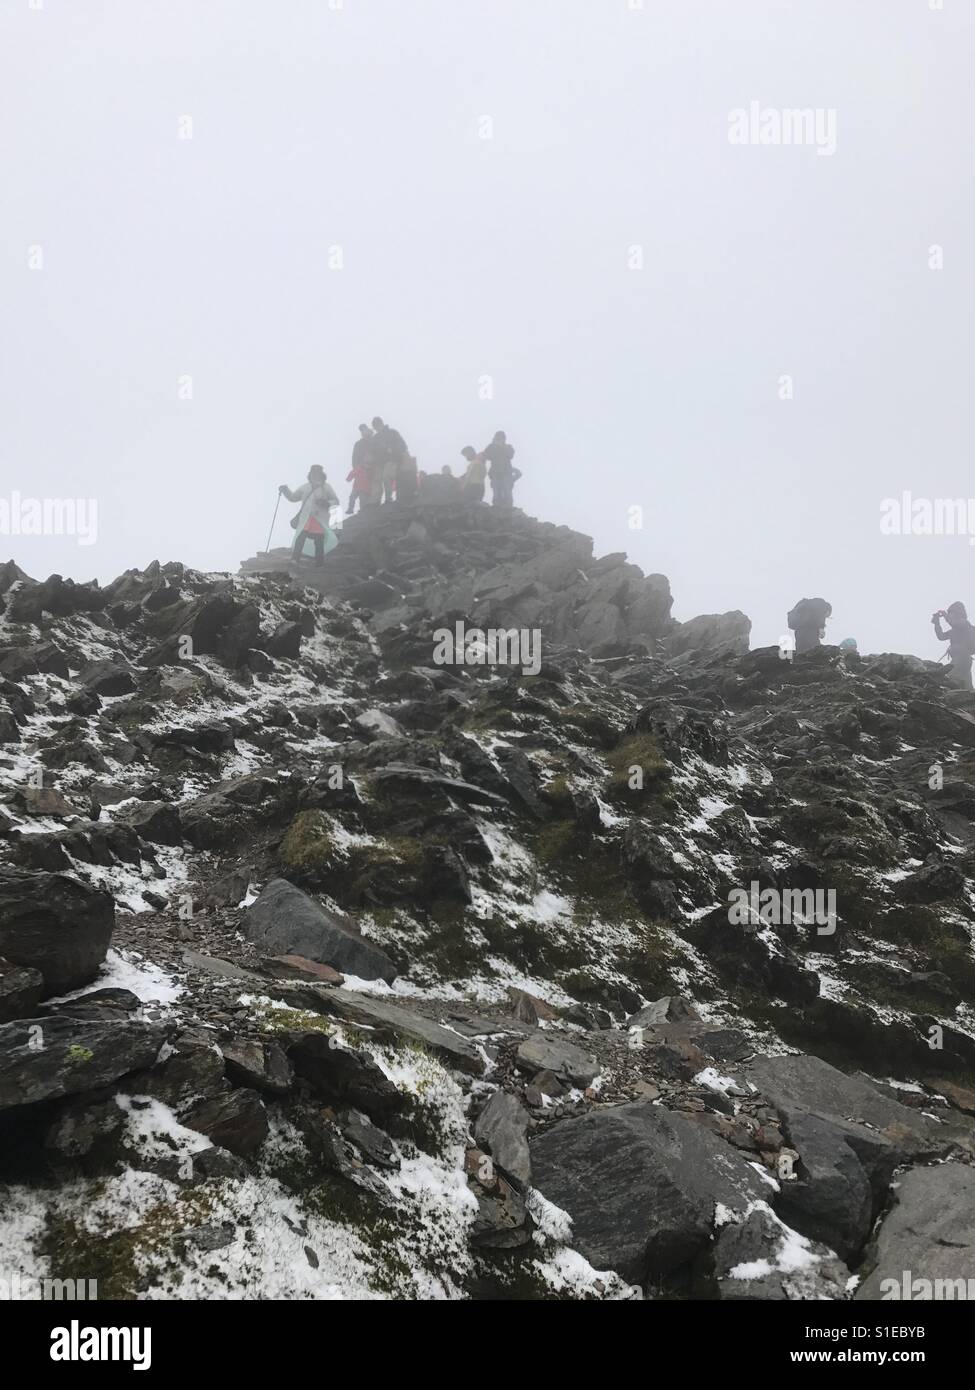 People on the peak of Mount Snowdon in the cloud with snow on the ground Stock Photo